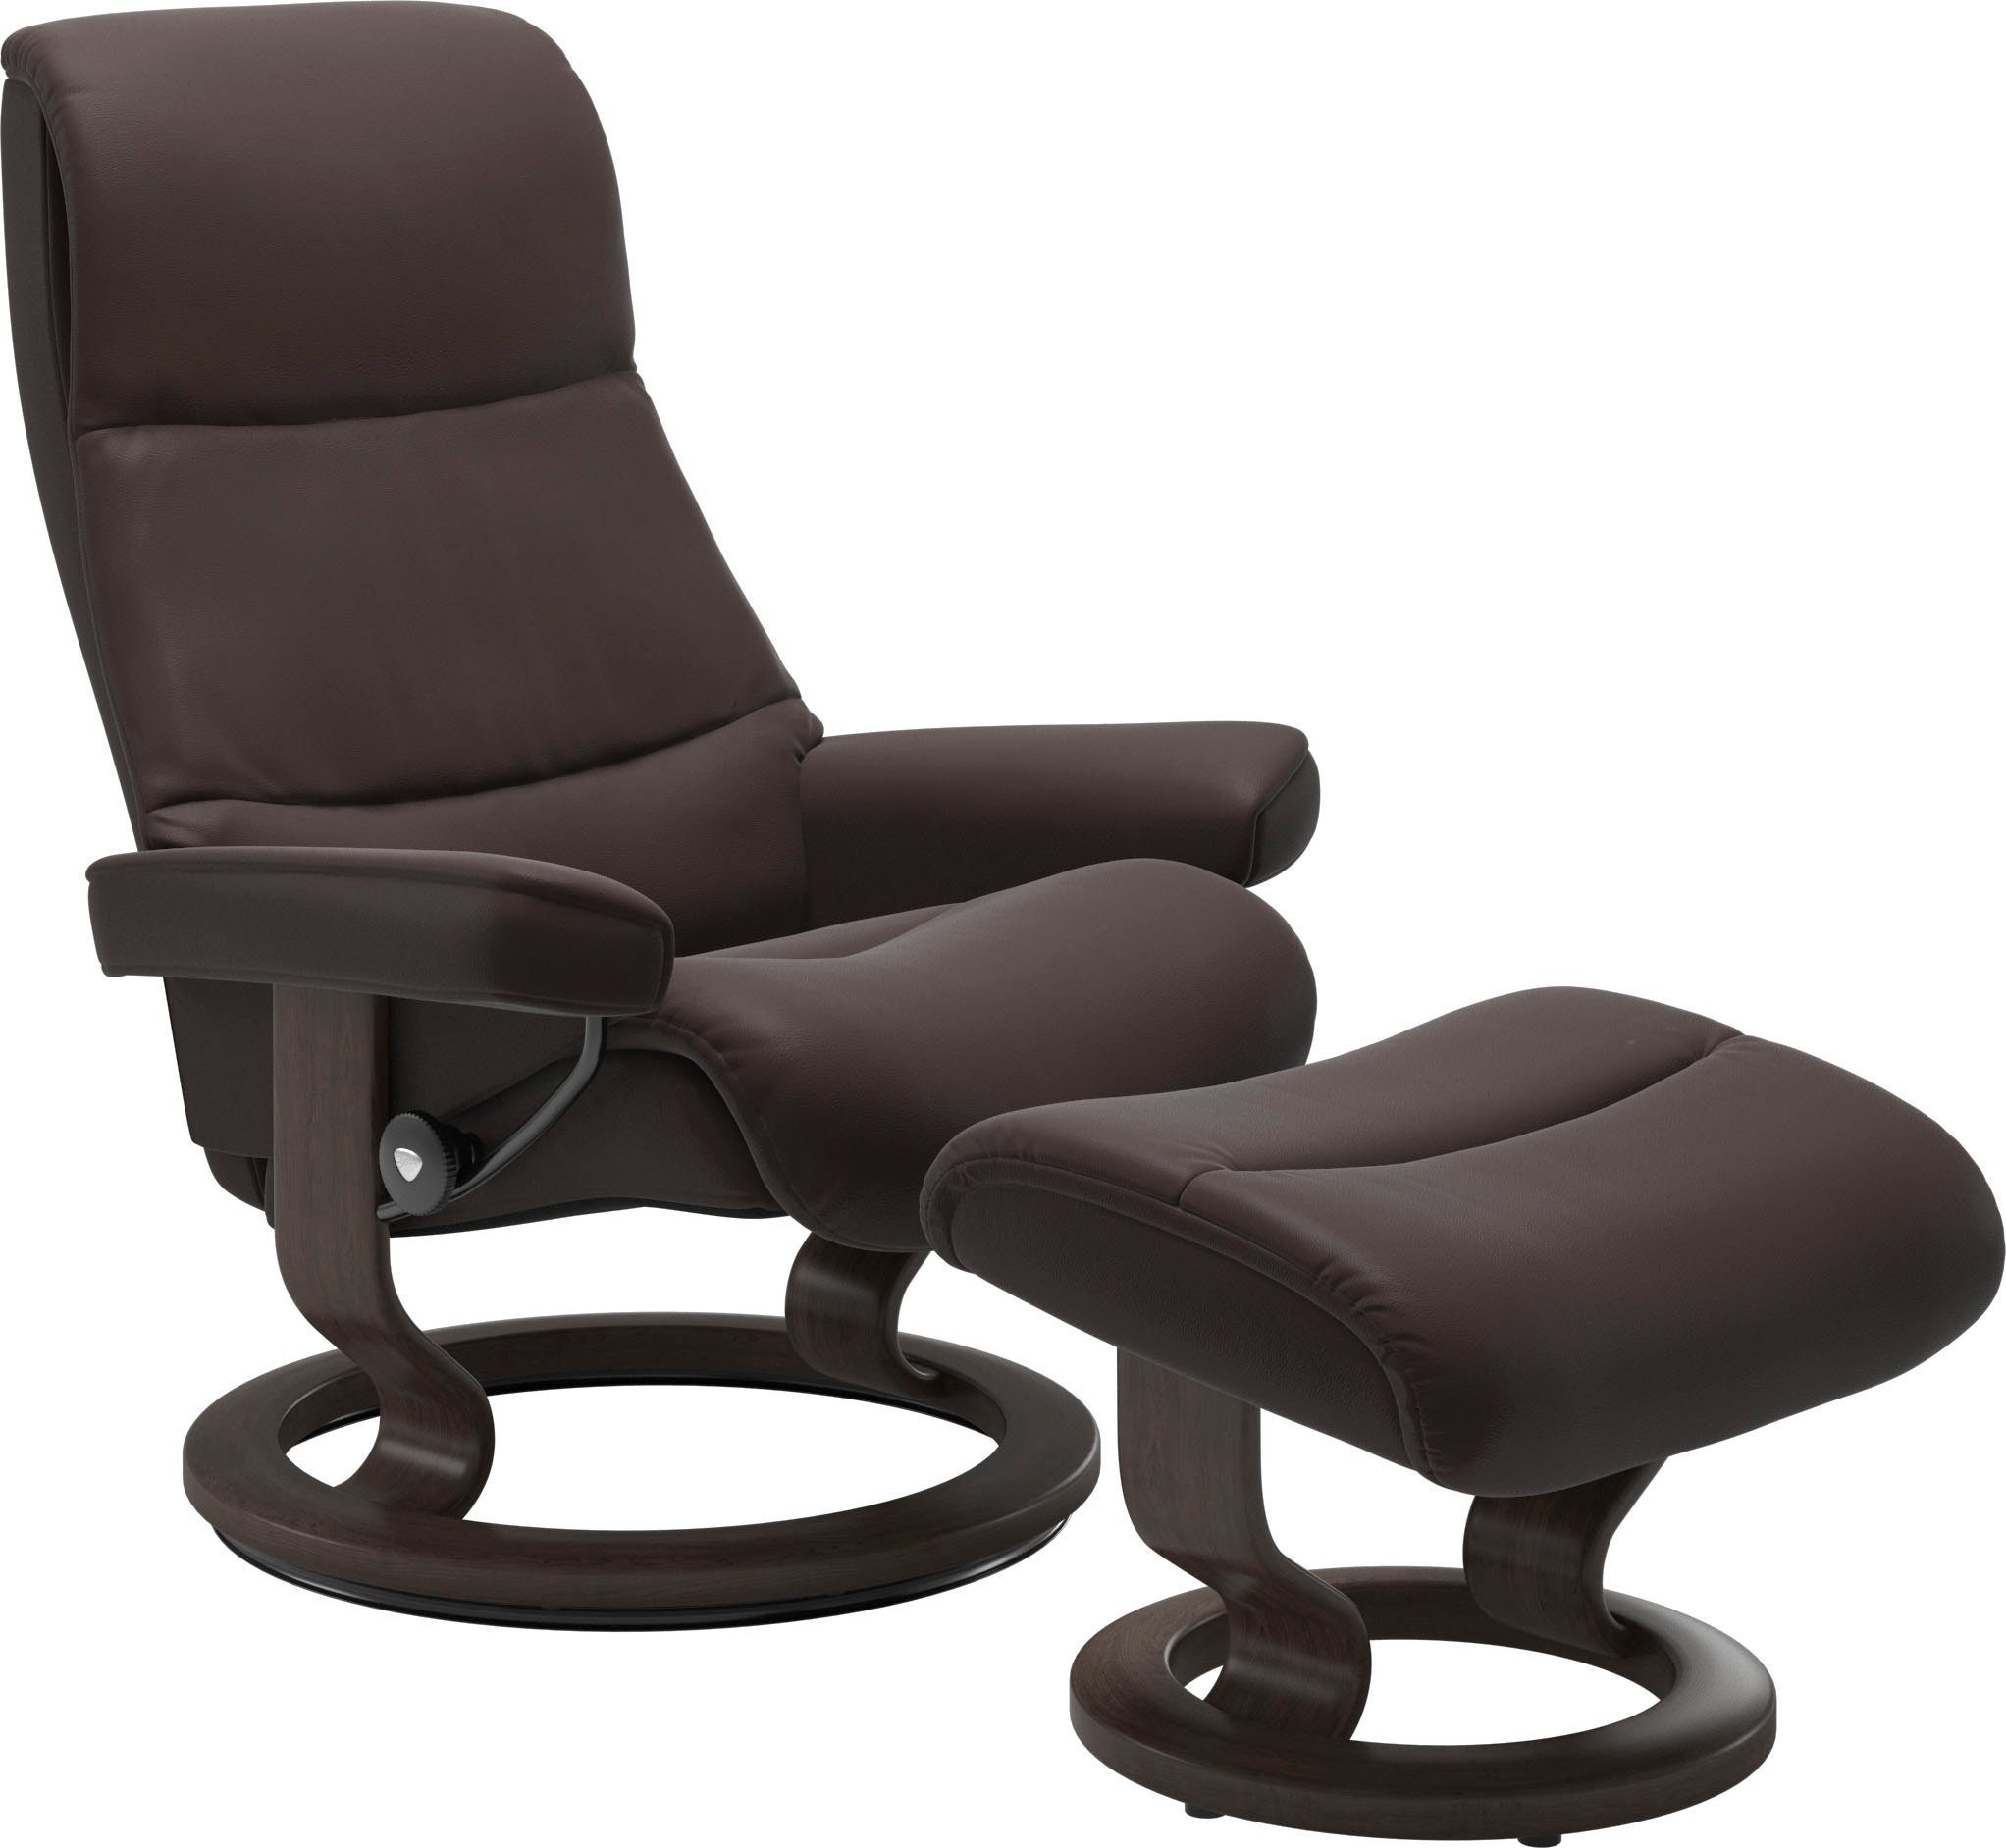 Wenge Größe L,Gestell Base, View, mit Classic Relaxsessel Stressless®